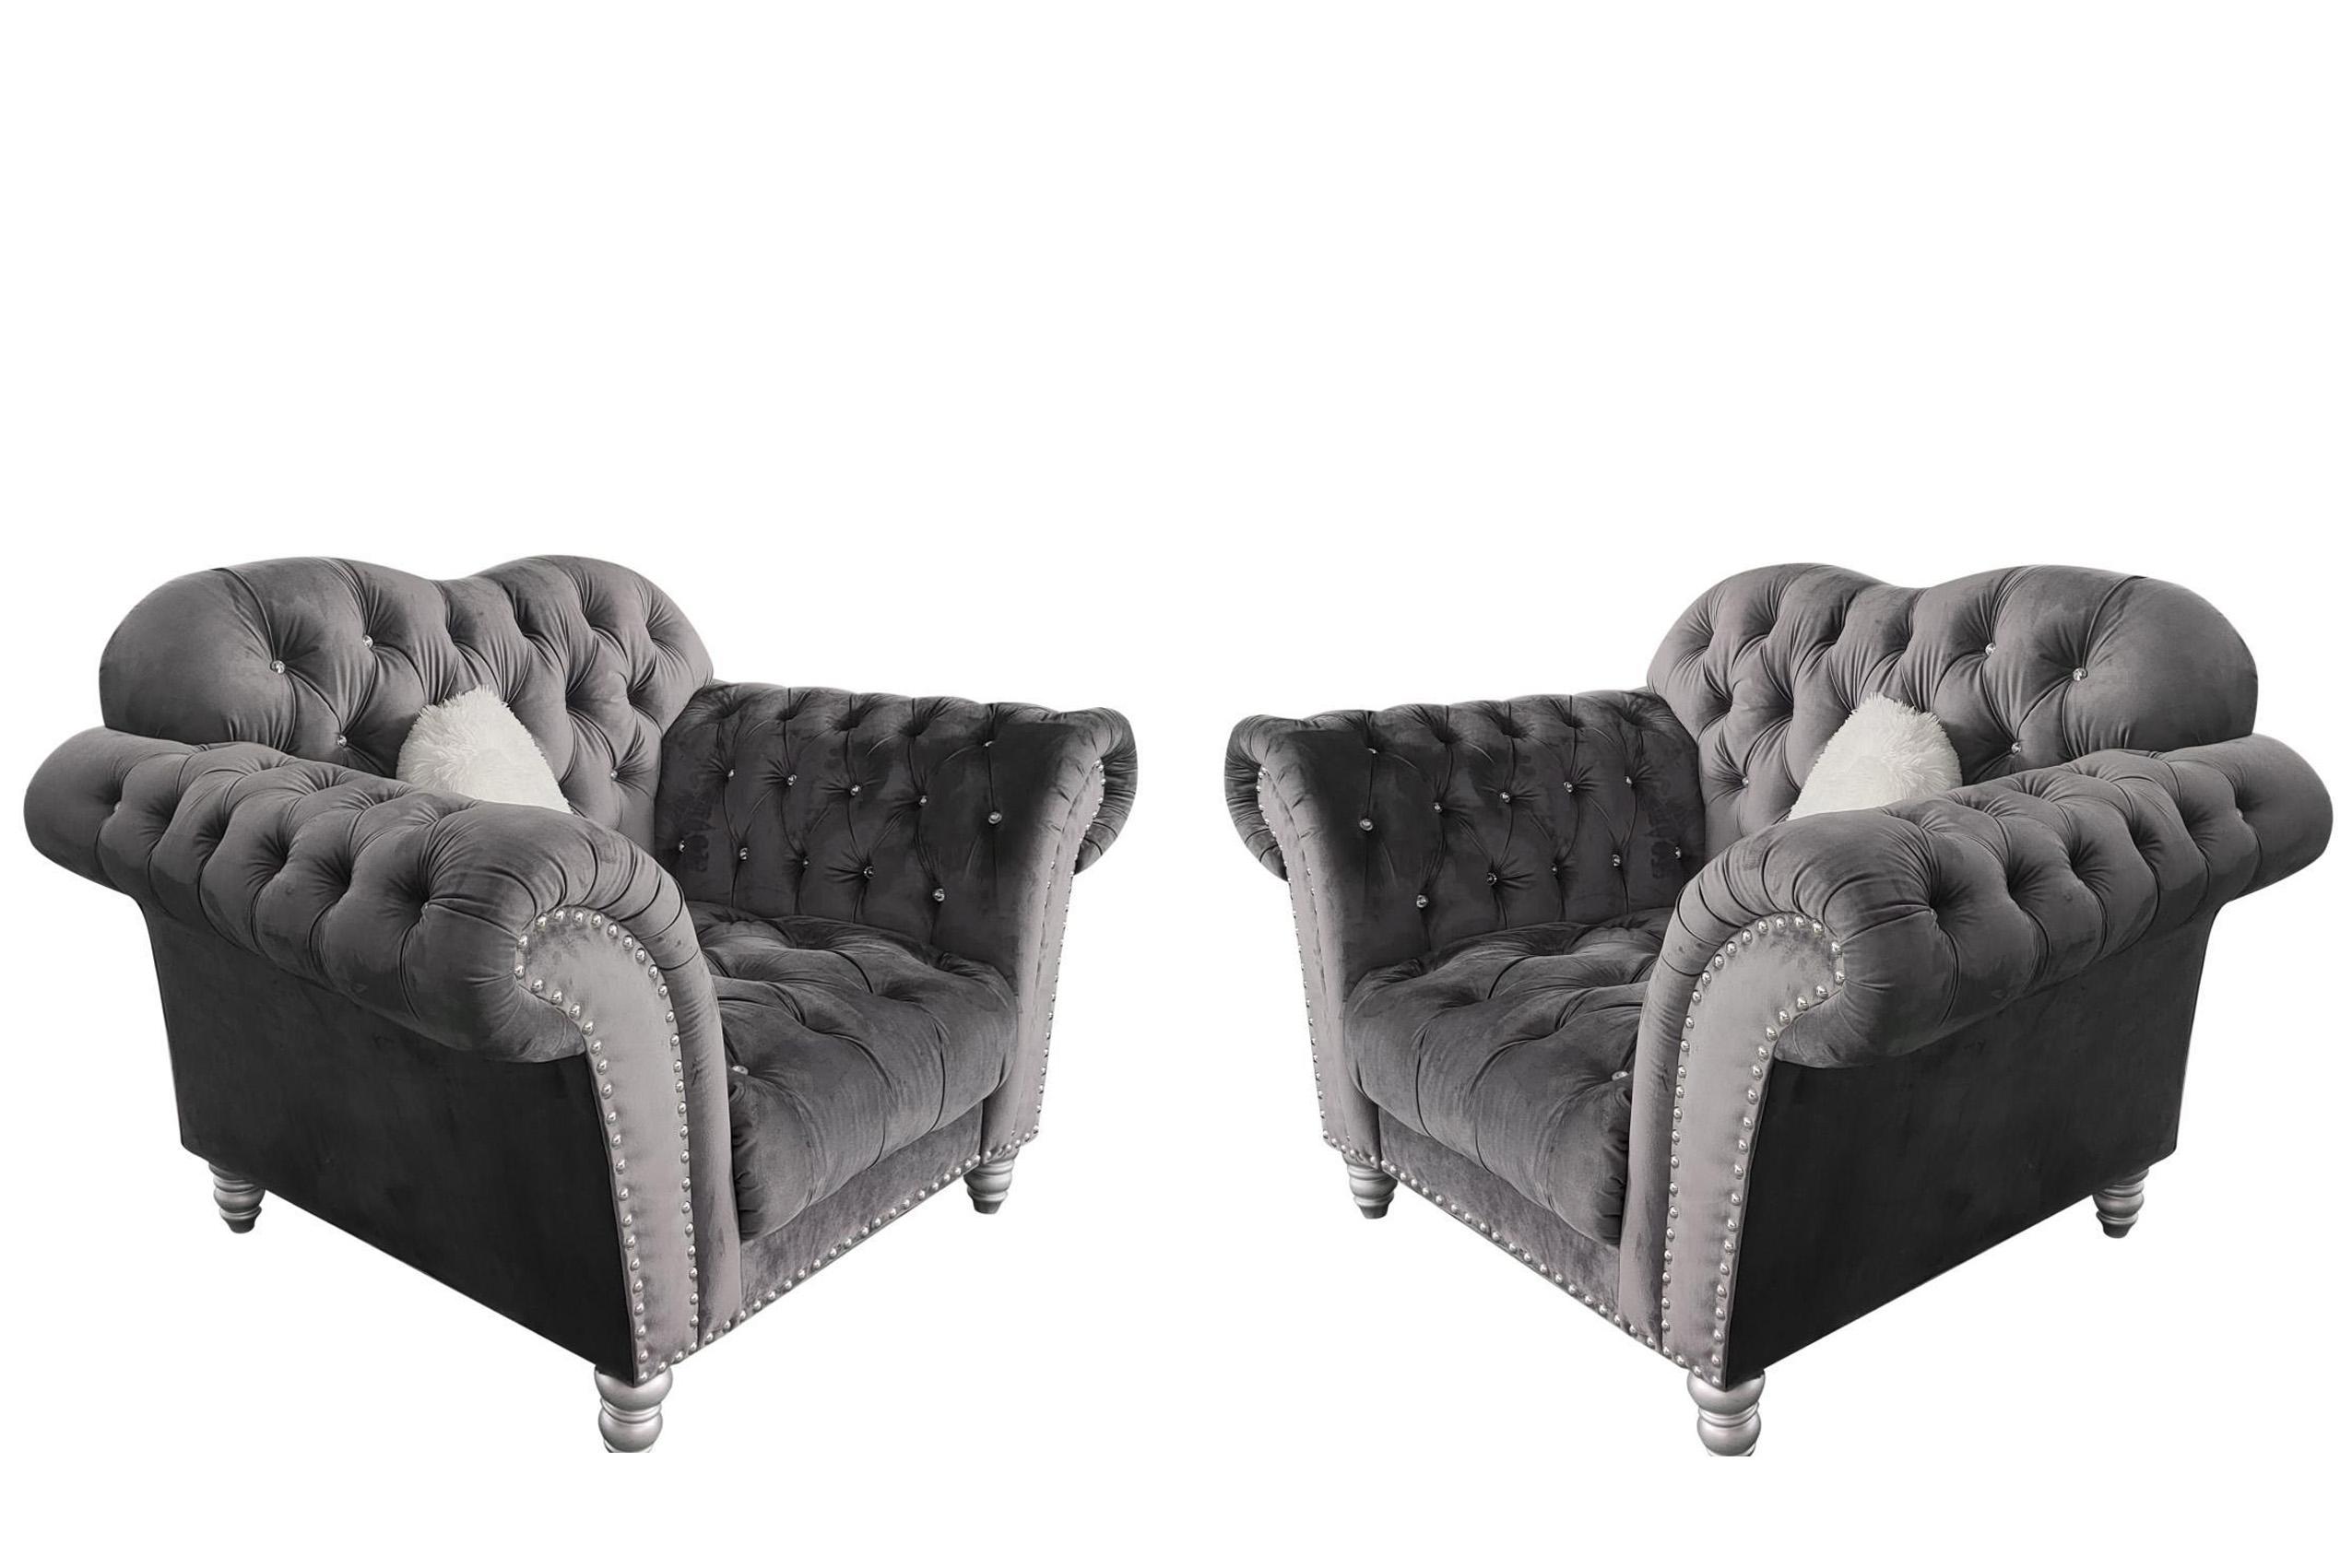 Contemporary, Modern Arm Chair Set JESSICA JESSICA-CH-Set-2 in Gray Fabric